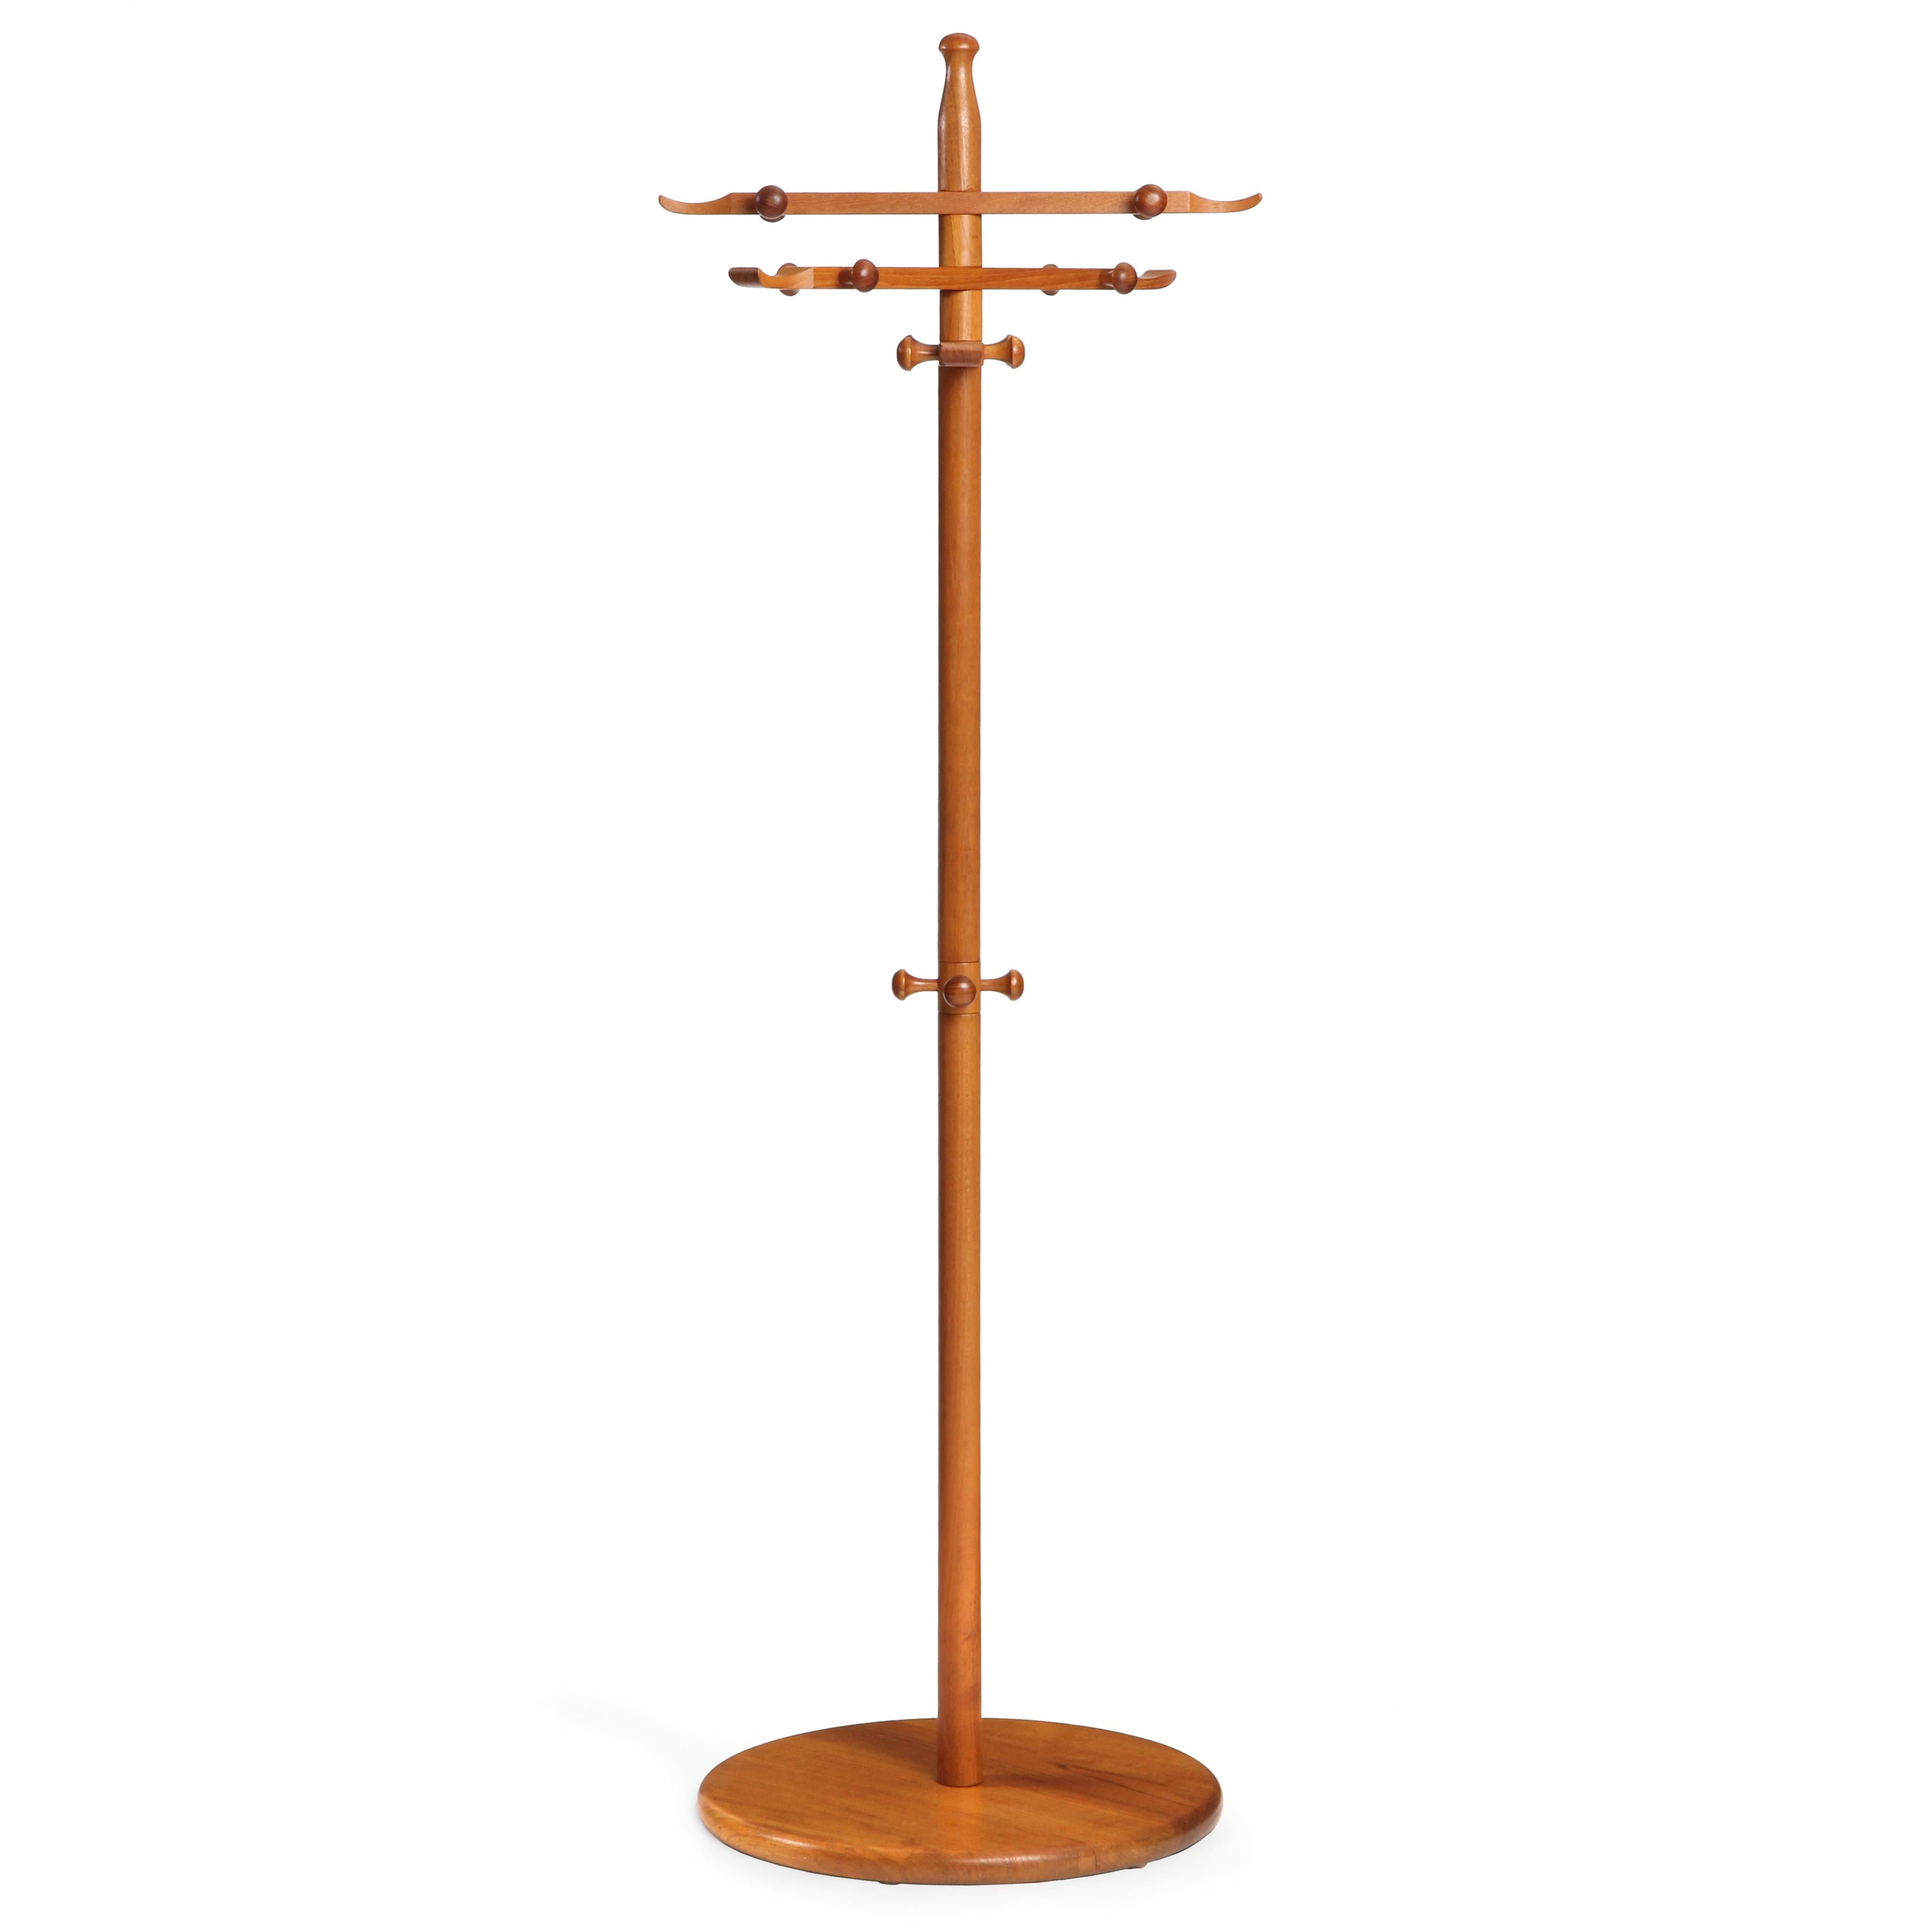 A wooden coat rack by Ebbe Gehl and Soren Nissen in solid teak; well scaled and finely crafted in teak with a disc base, vertical pole supporting three revolving arms with lathe turned hooks. Produced by Aksel Kjaersgaard in Denmark in the 1960s.